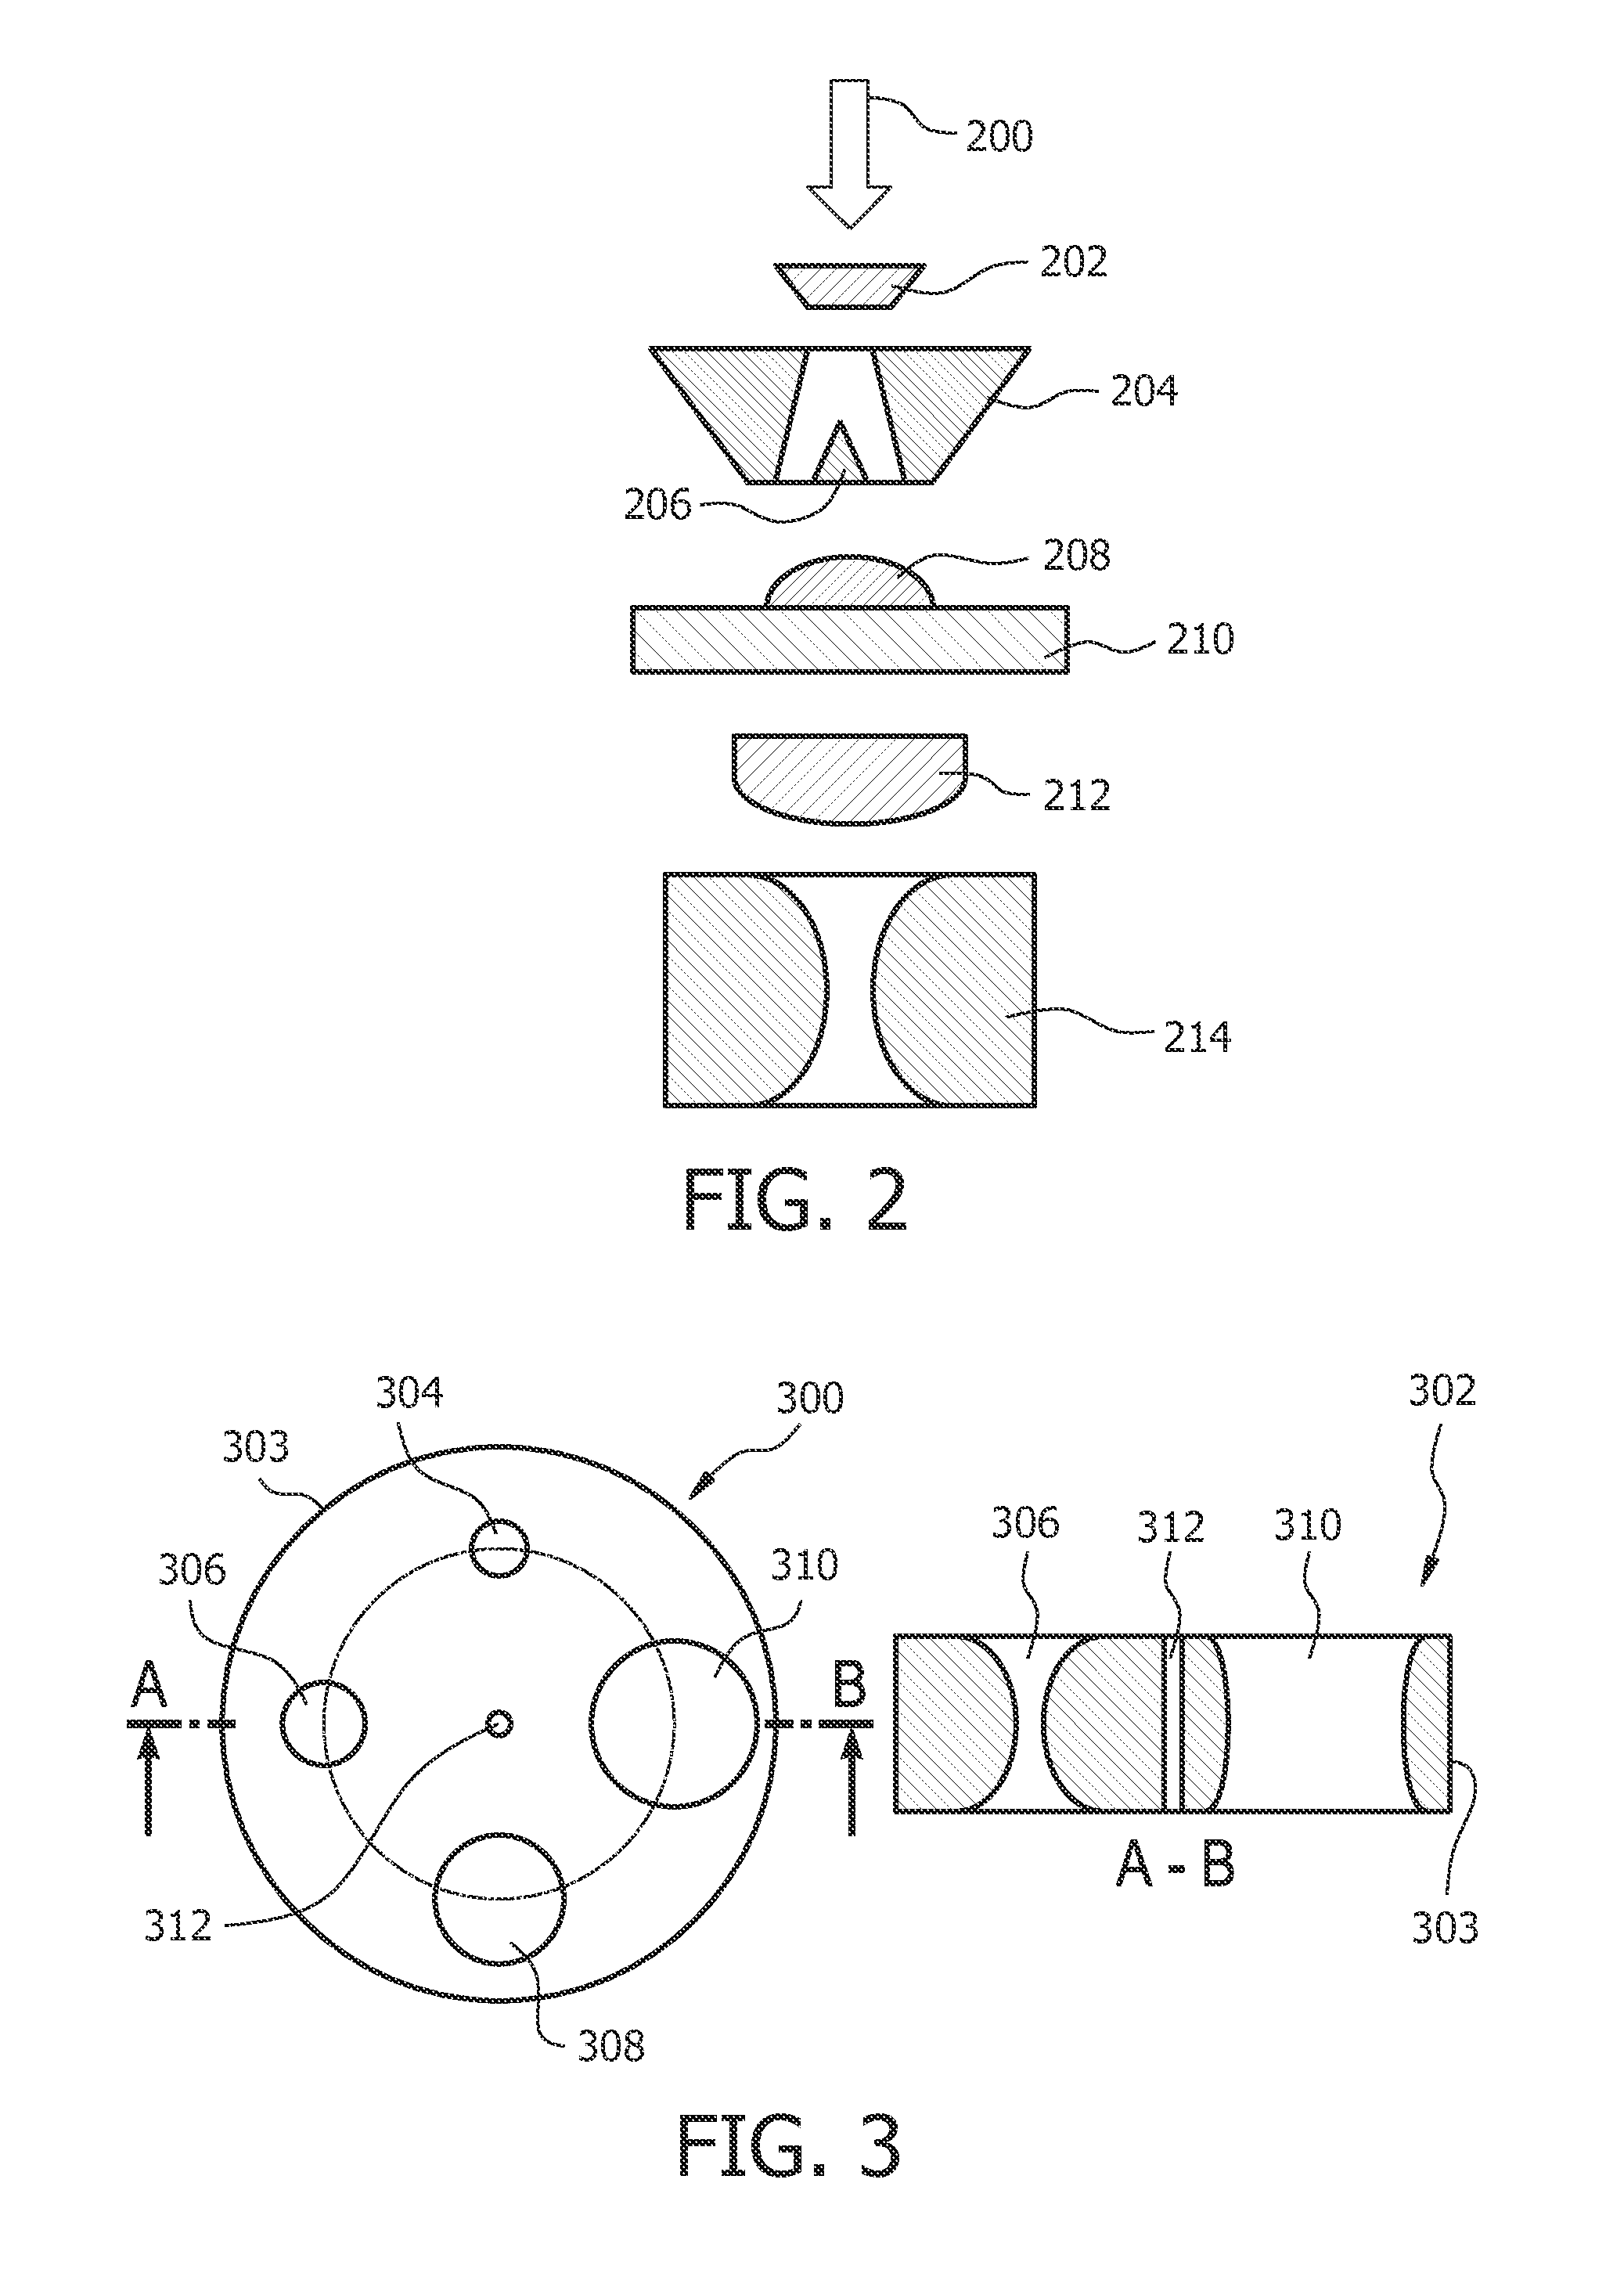 Therapeutic apparatus comprising a radiotherapy apparatus, a mechanical positioning system, and a magnetic resonance imaging system